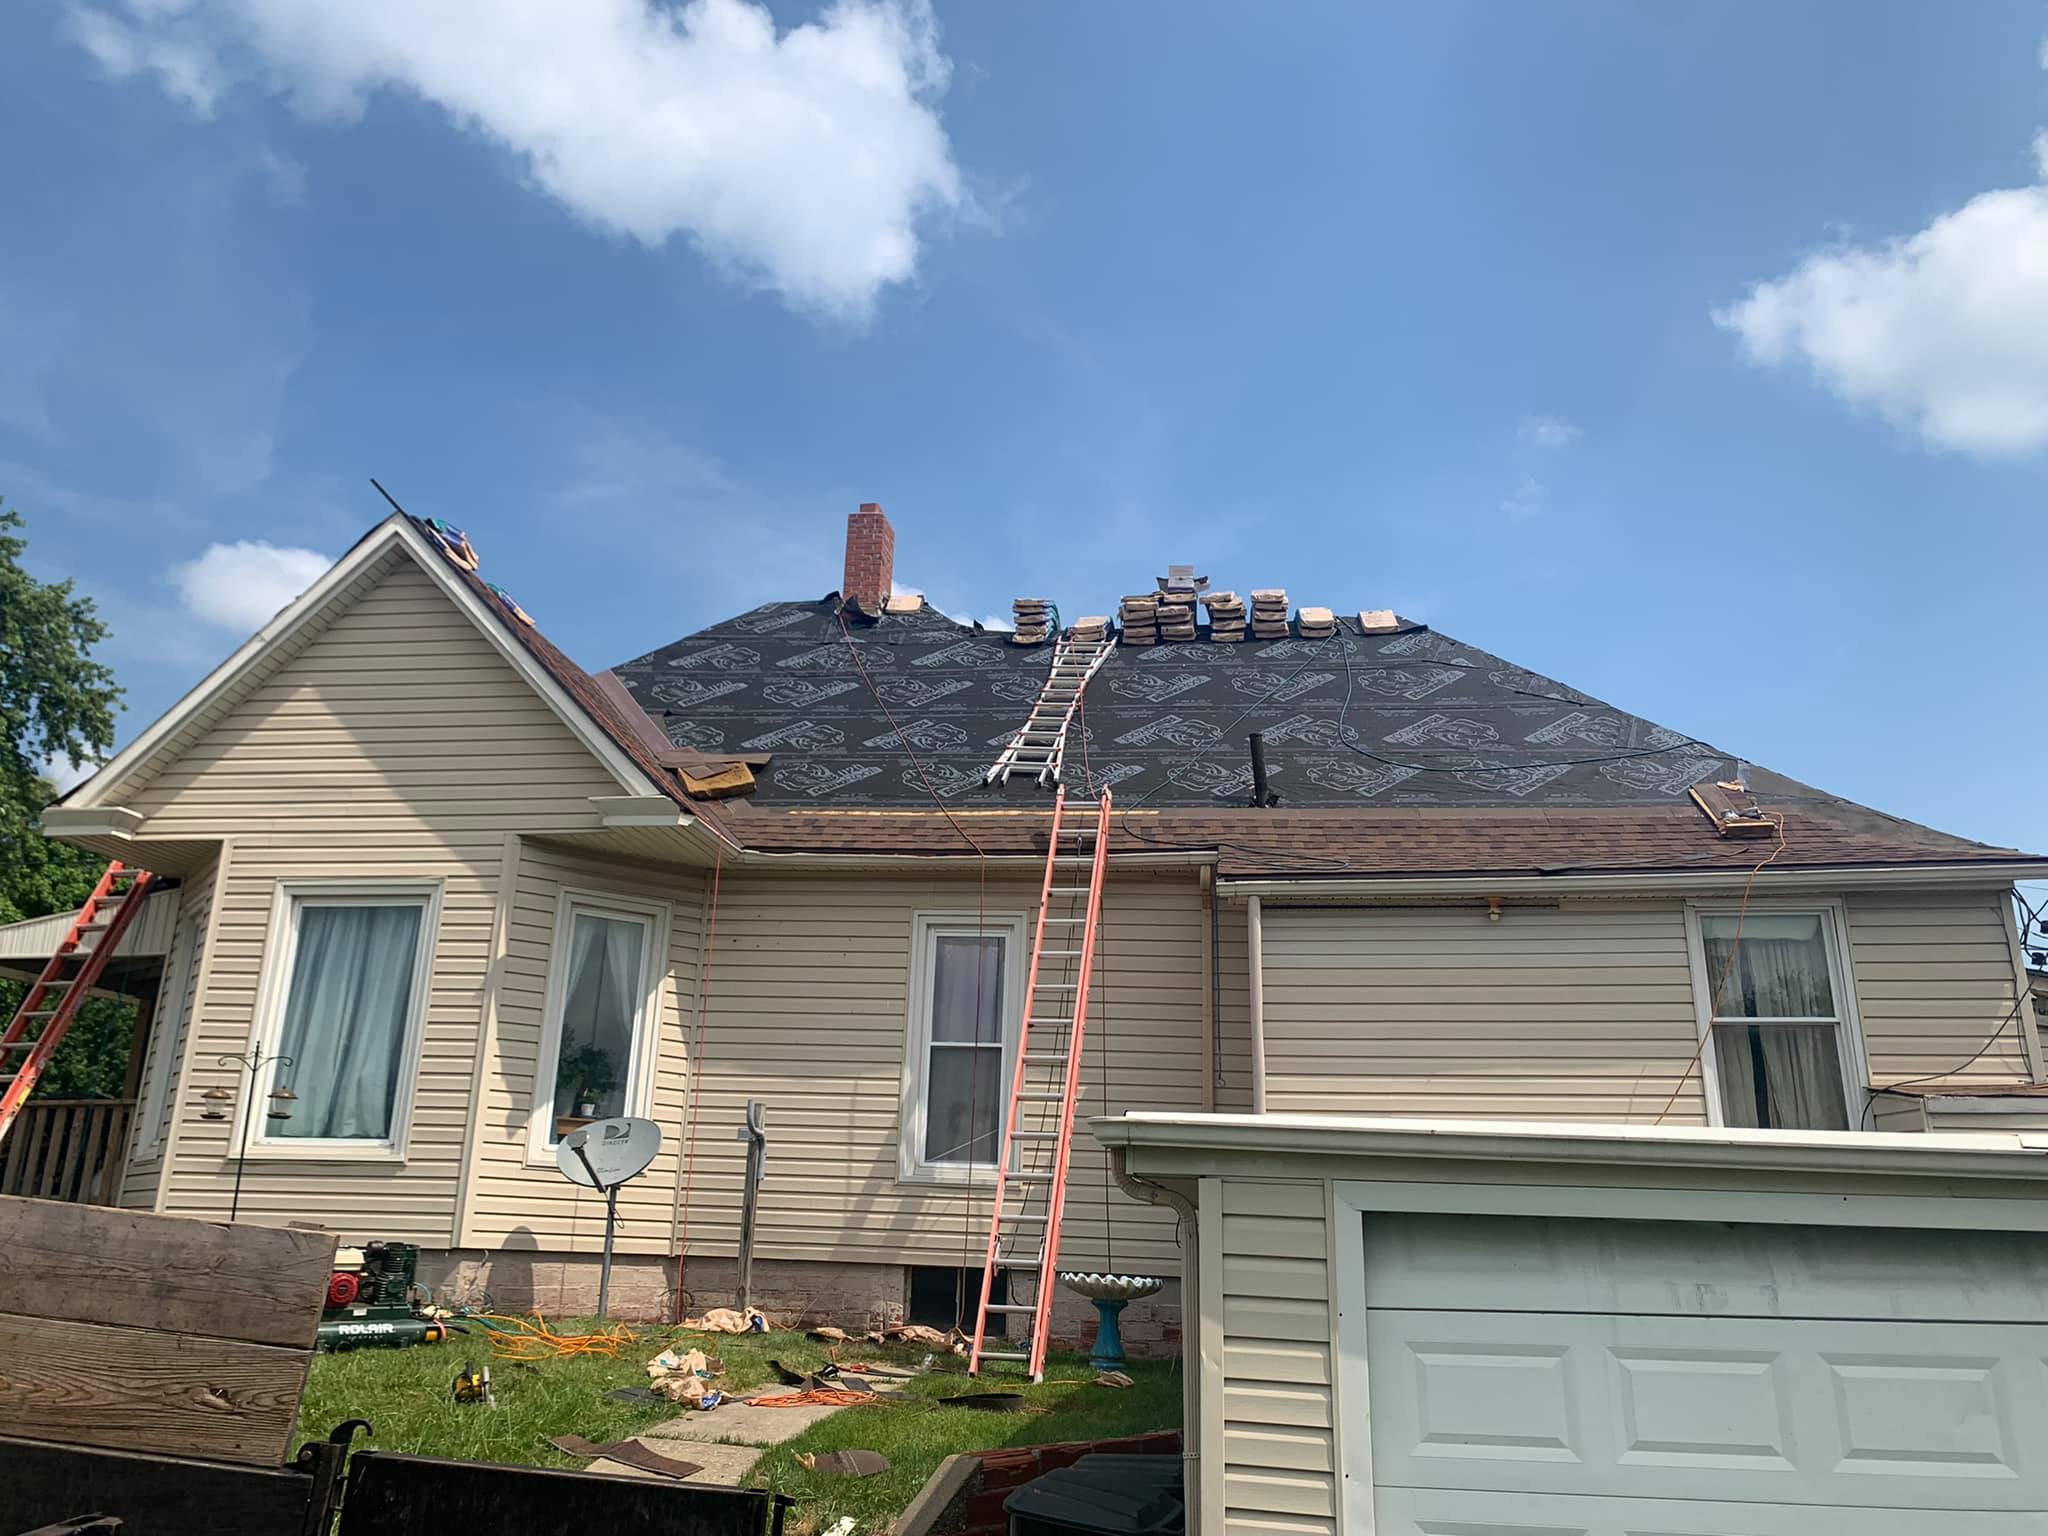 Roofing Companies Near Atchison Kansas - Questions To Ask